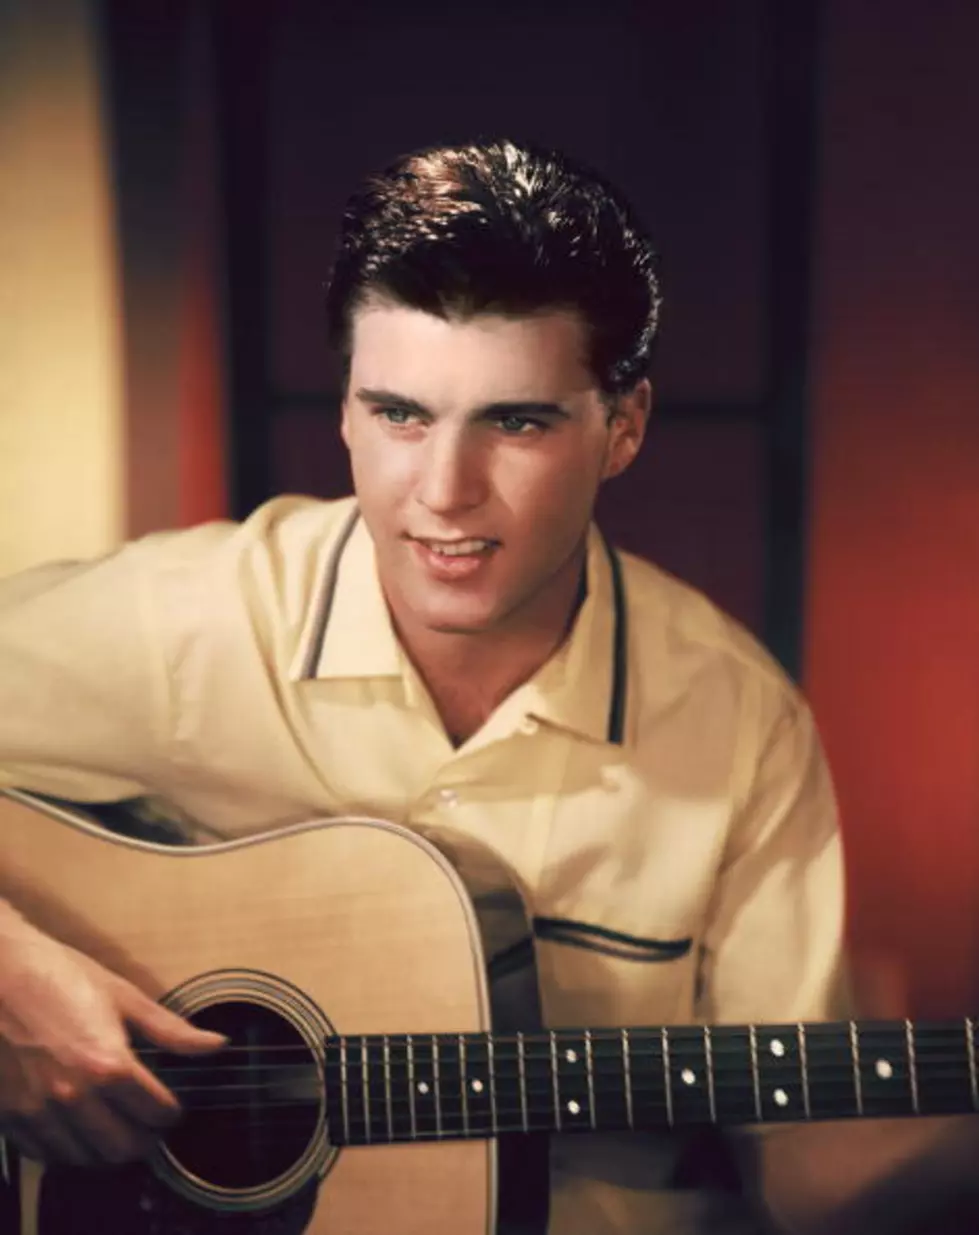 “Garden Party” by Rick Nelson-Rayman’s Song of the Day [VIDEO]